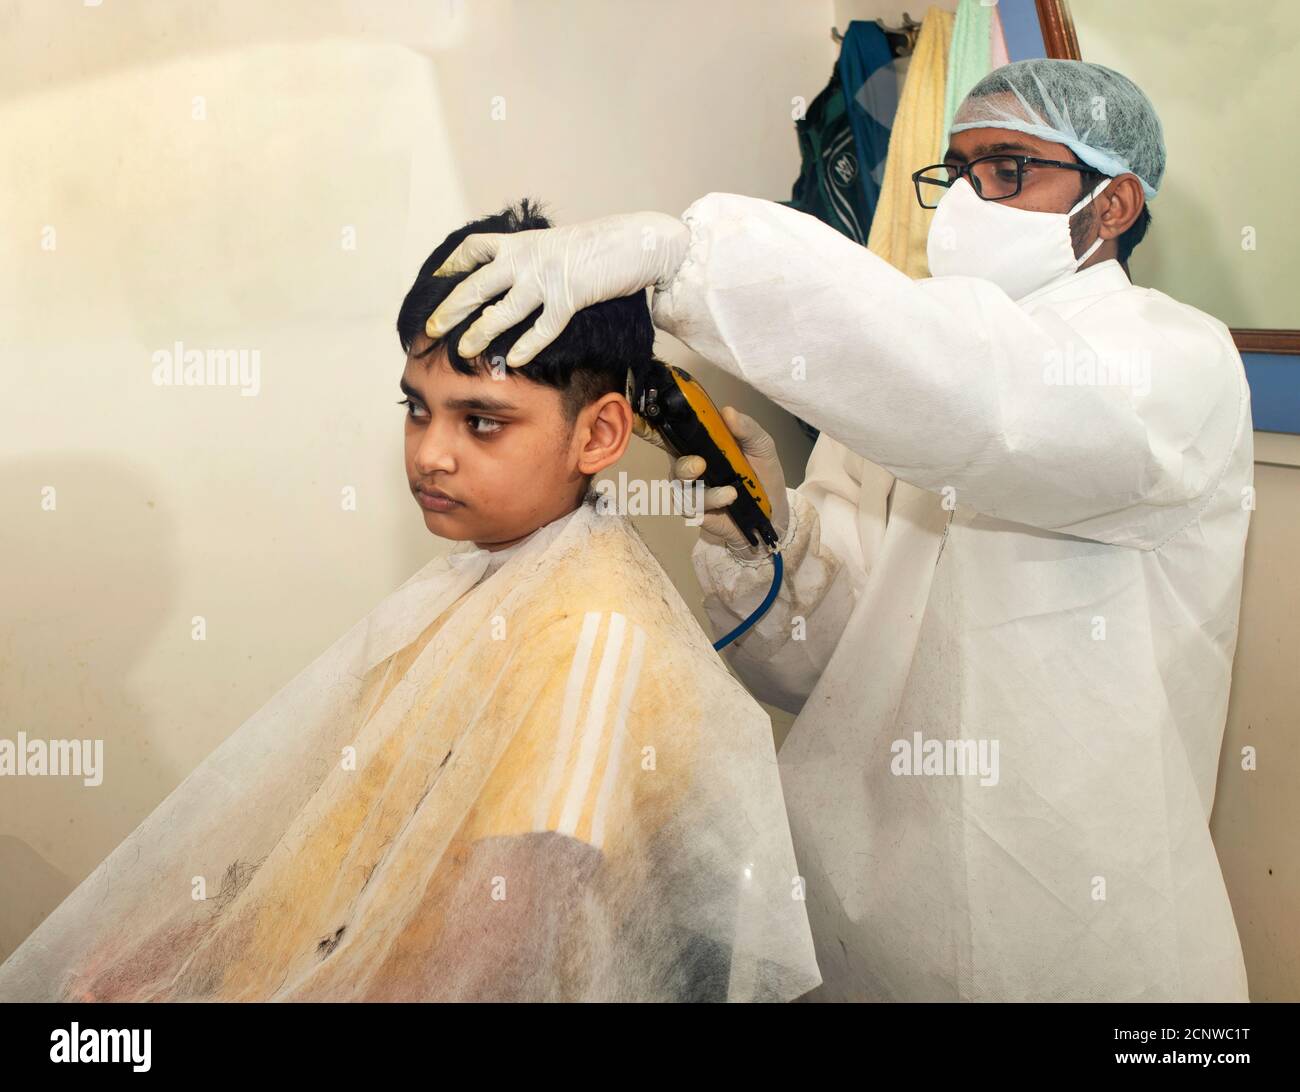 Boy getting a haircut at the barber shop. Barber wearing a white suit and mask and gloves. Location: Nashik, Maharashtra, India Stock Photo